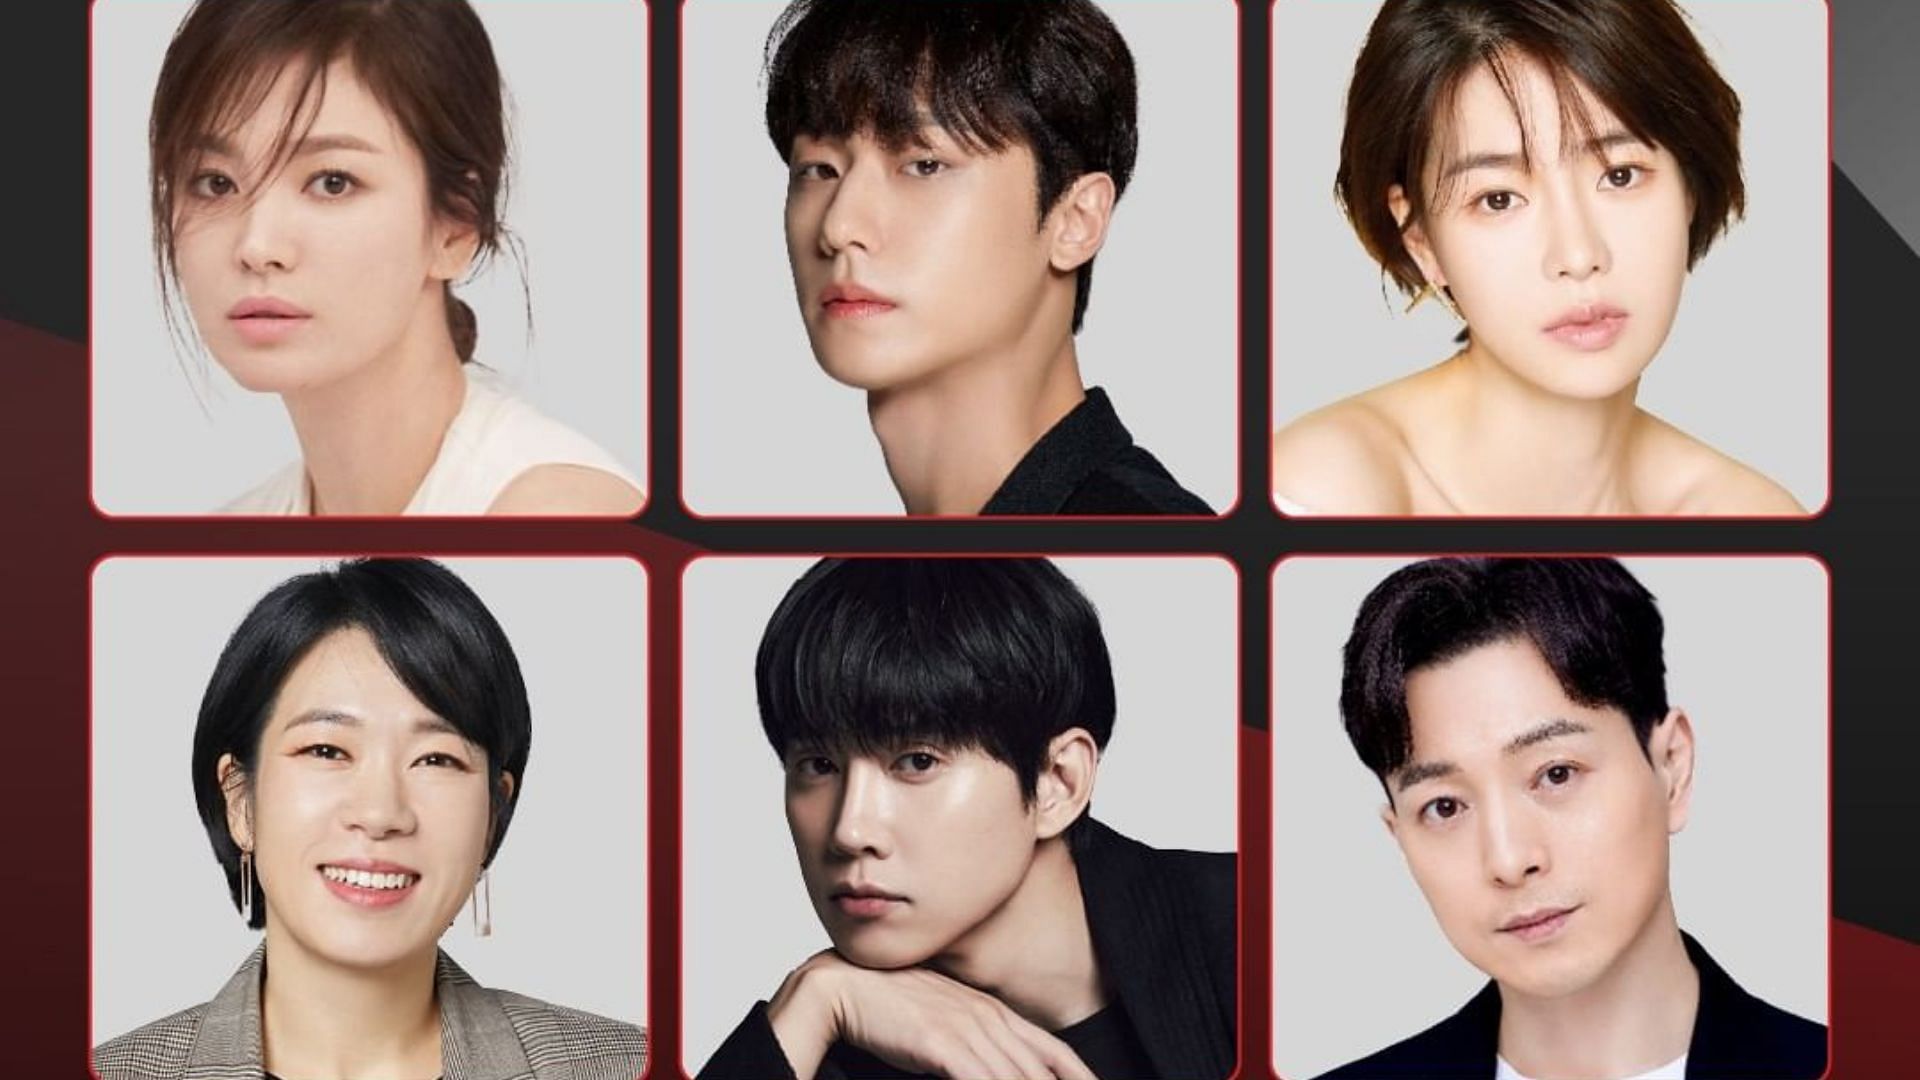 Meet The Glory cast featuring Song Hye-kyo, Lee Do-hyun and others (Image via Instagram/theswoonnetflix)